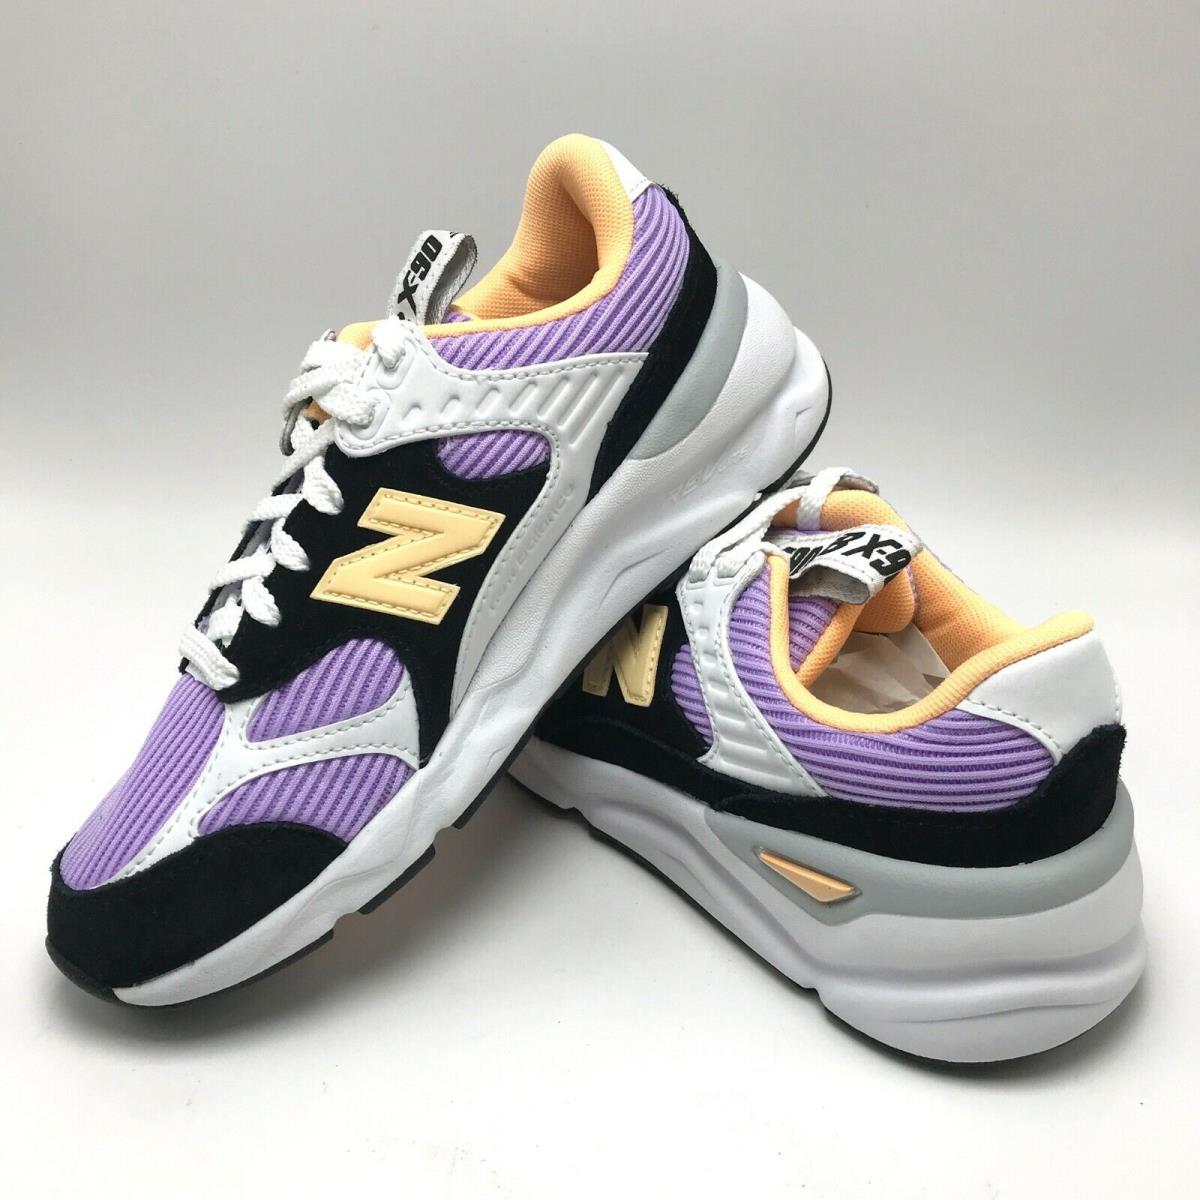 New Balance shoes  - Black with Dark Violet Glo 5